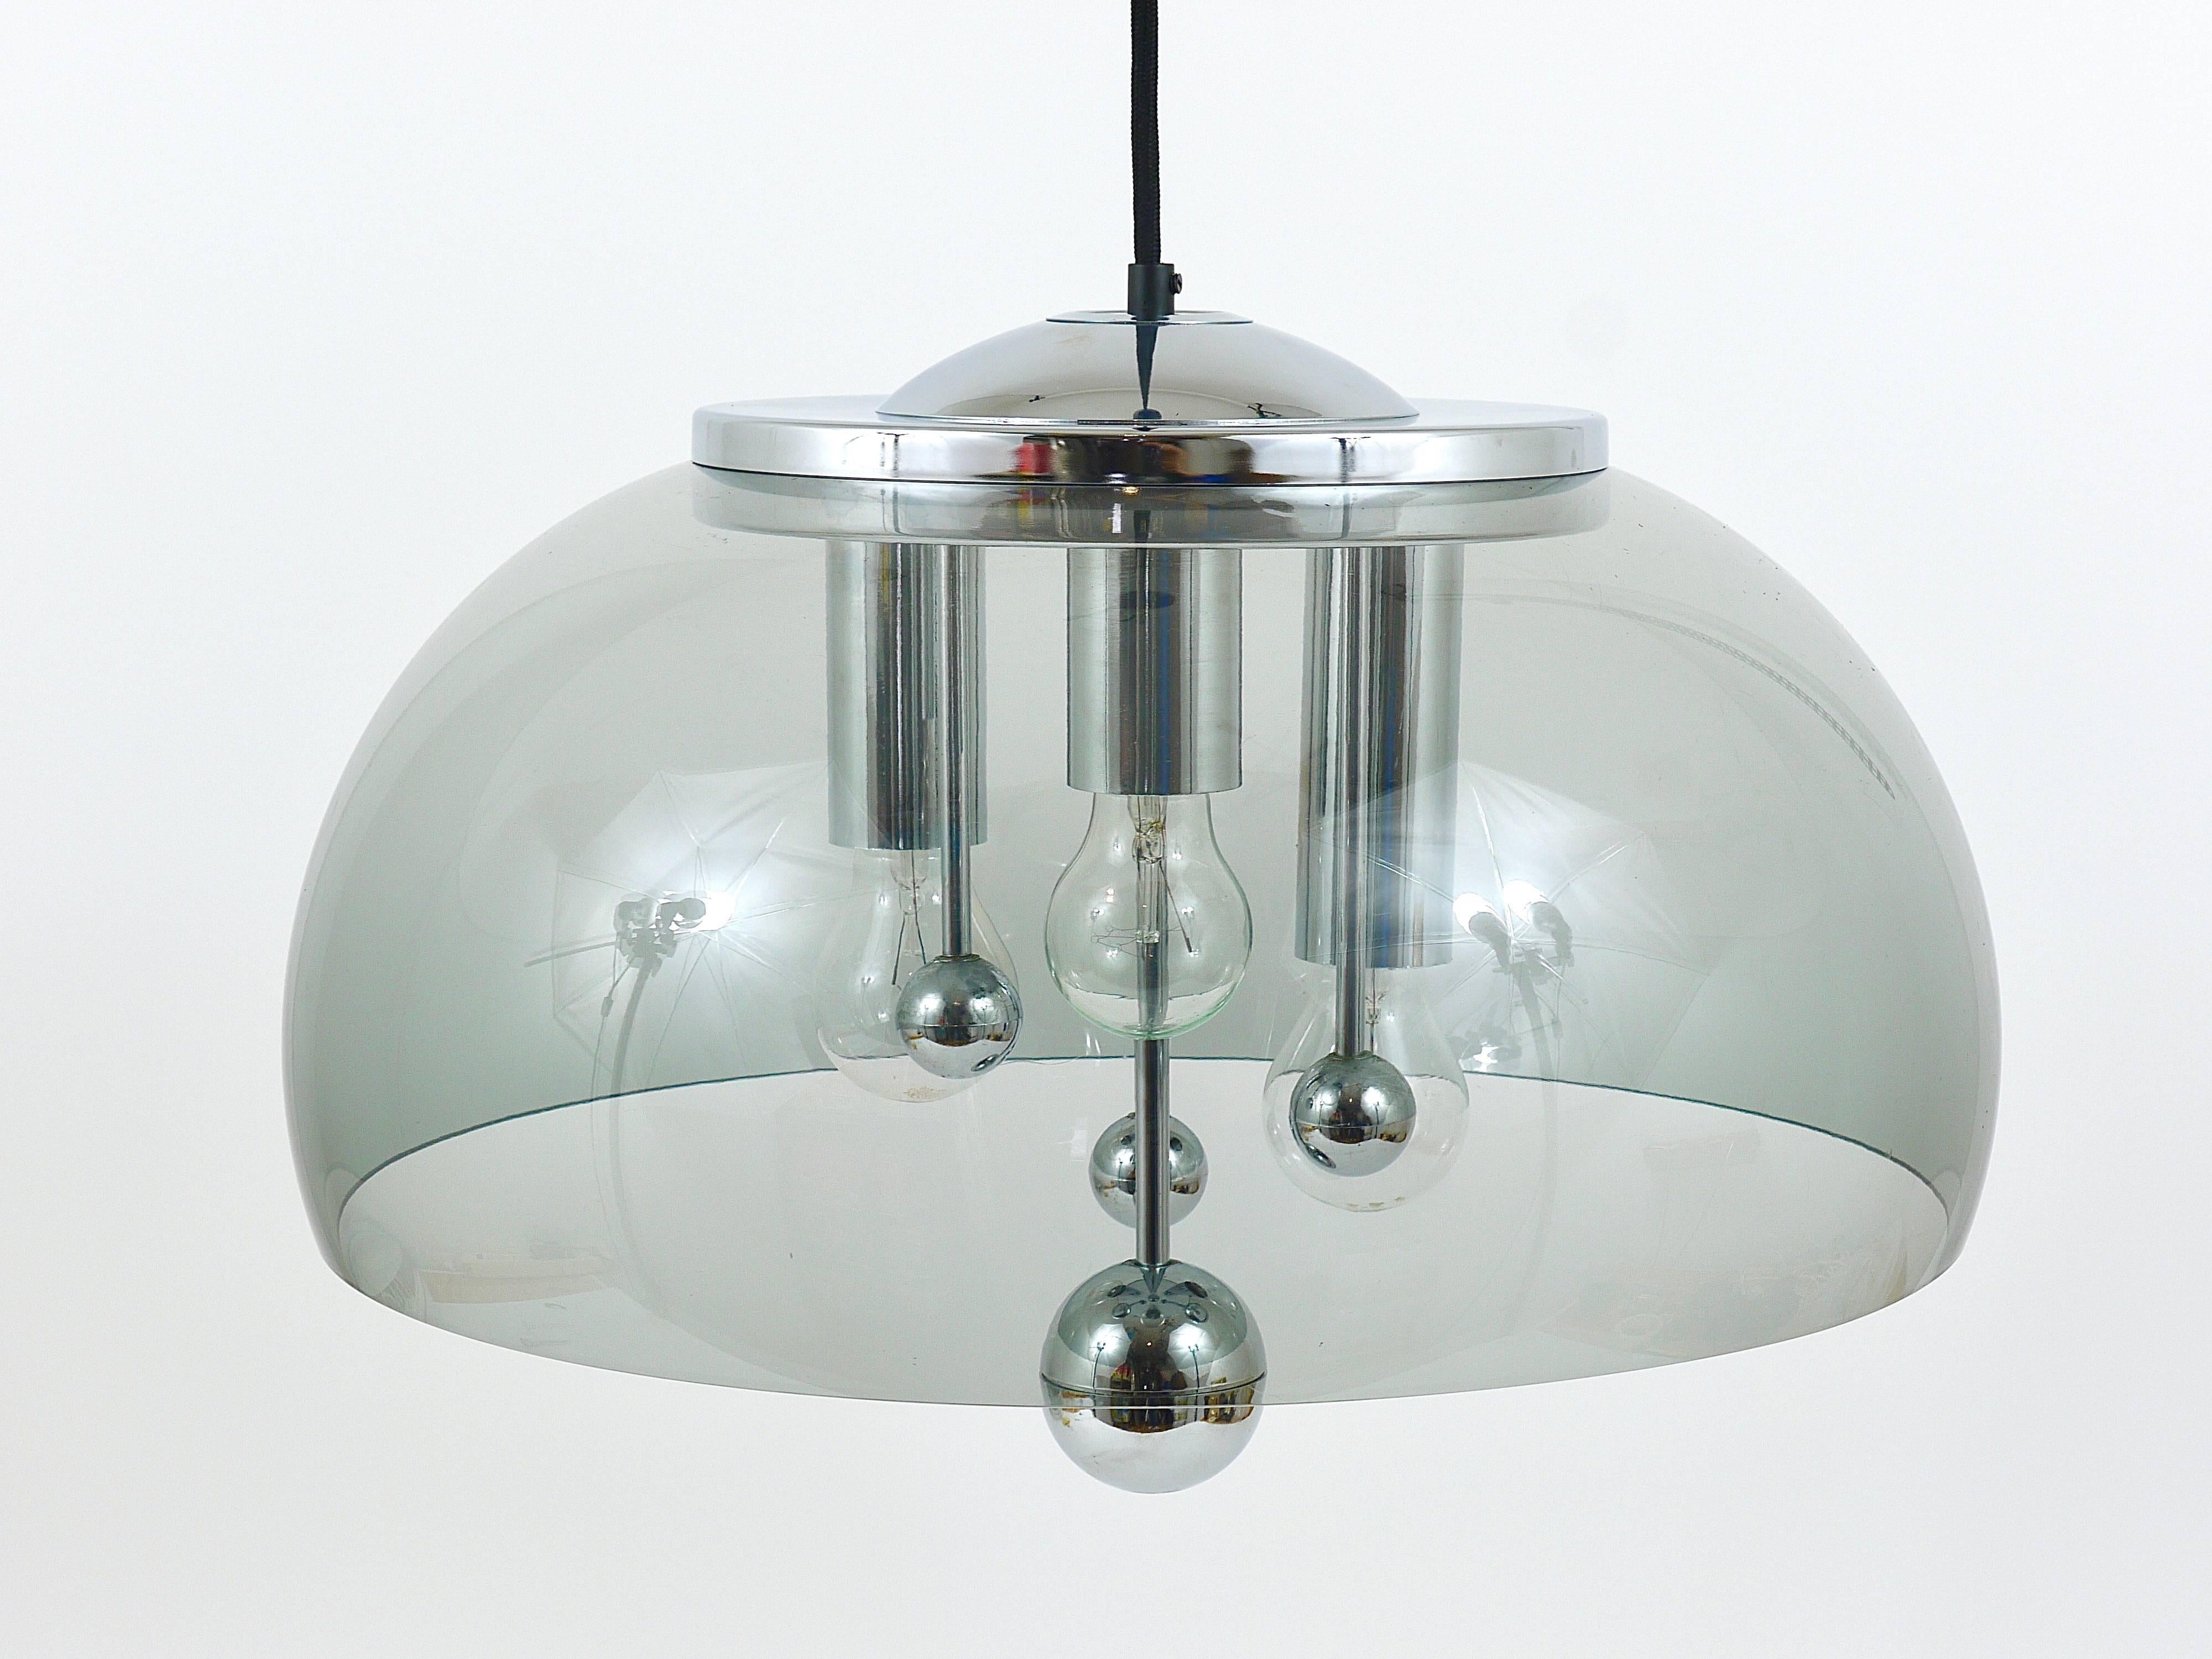 Midcentury Space Age Globe Pendant Lamp with Chromed Spheres, Germany, 1970s In Excellent Condition For Sale In Vienna, AT